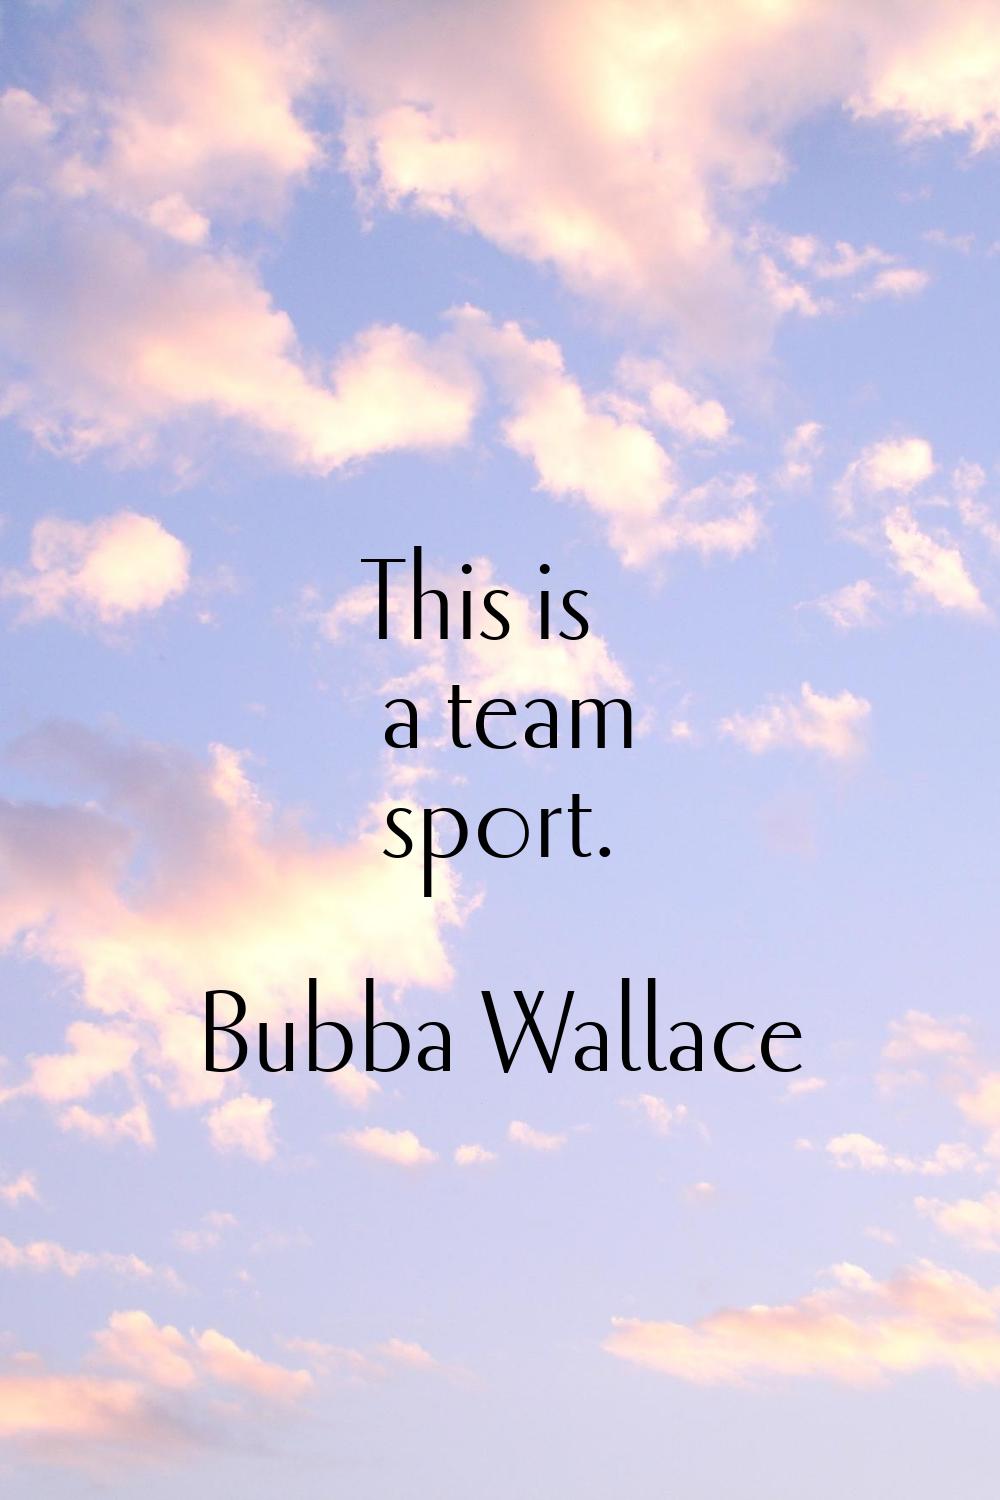 This is a team sport.